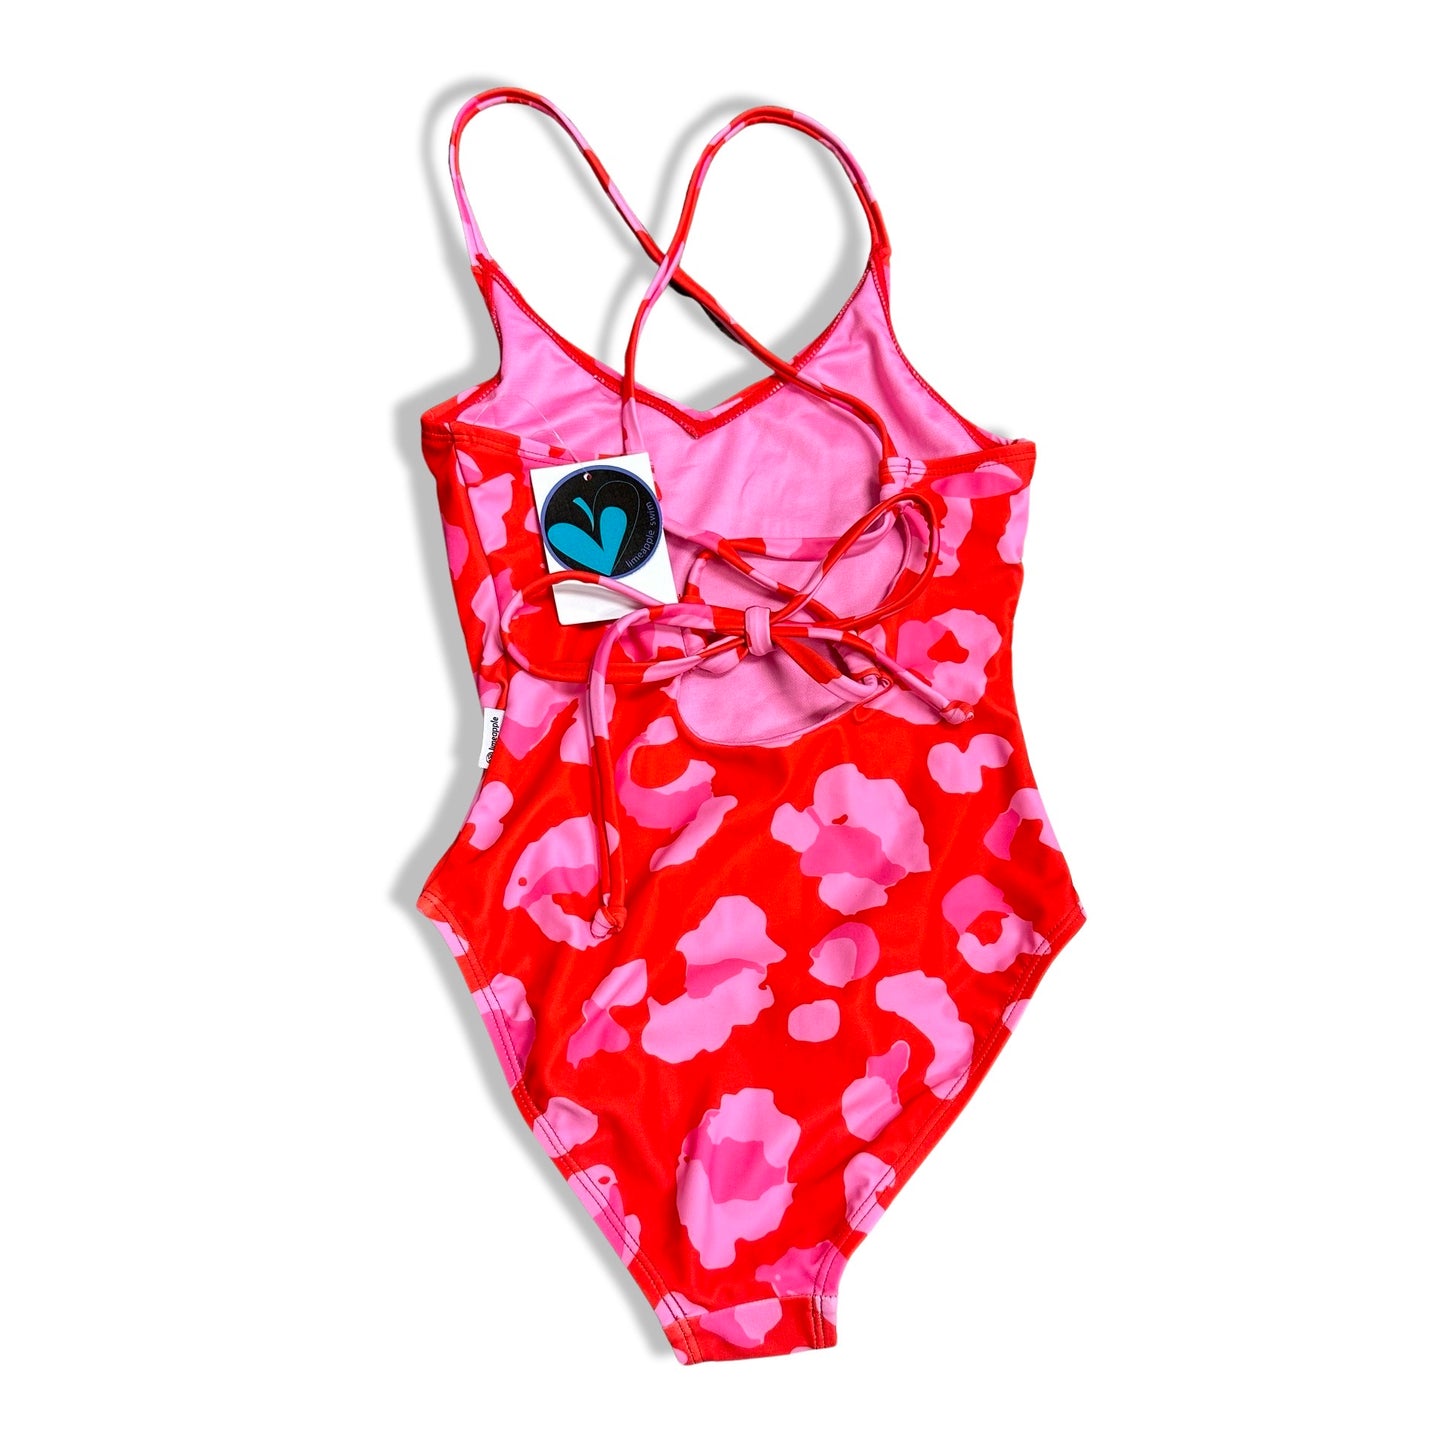 LIMEAPPLE SWIM, 7Y NEW WITH TAGS!